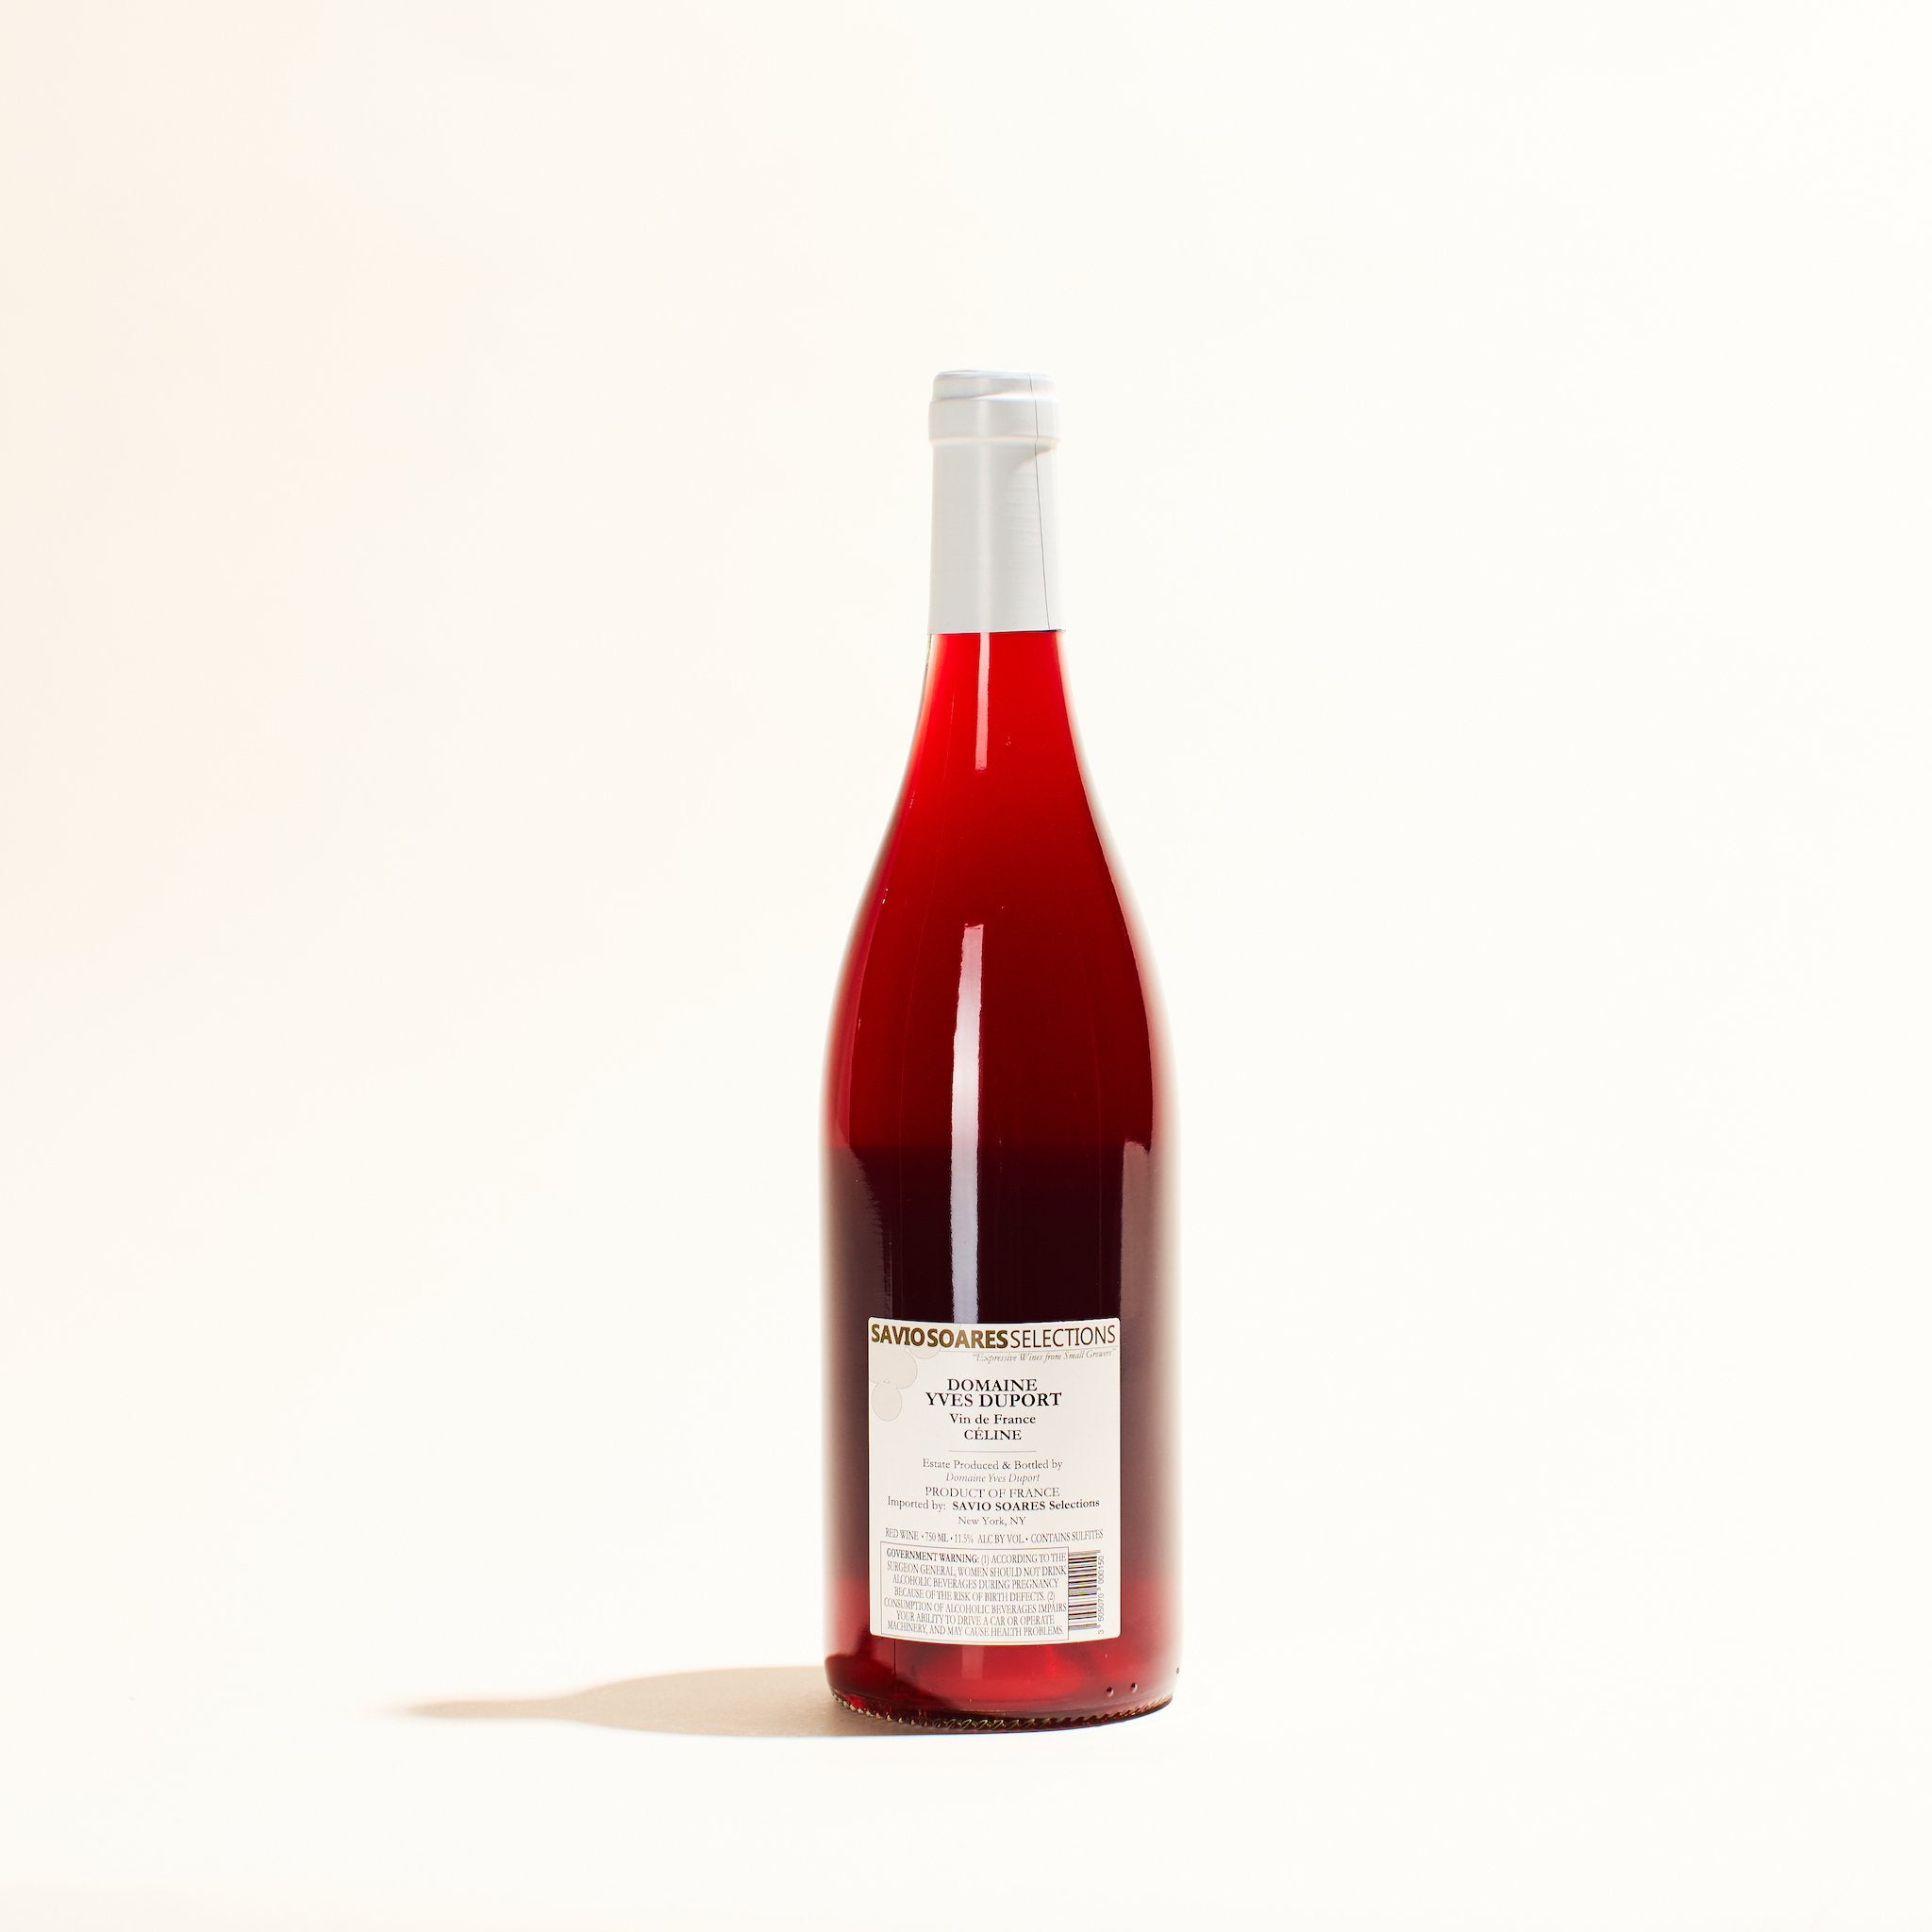 celine by maison yves duport natural rose wine from bugey france